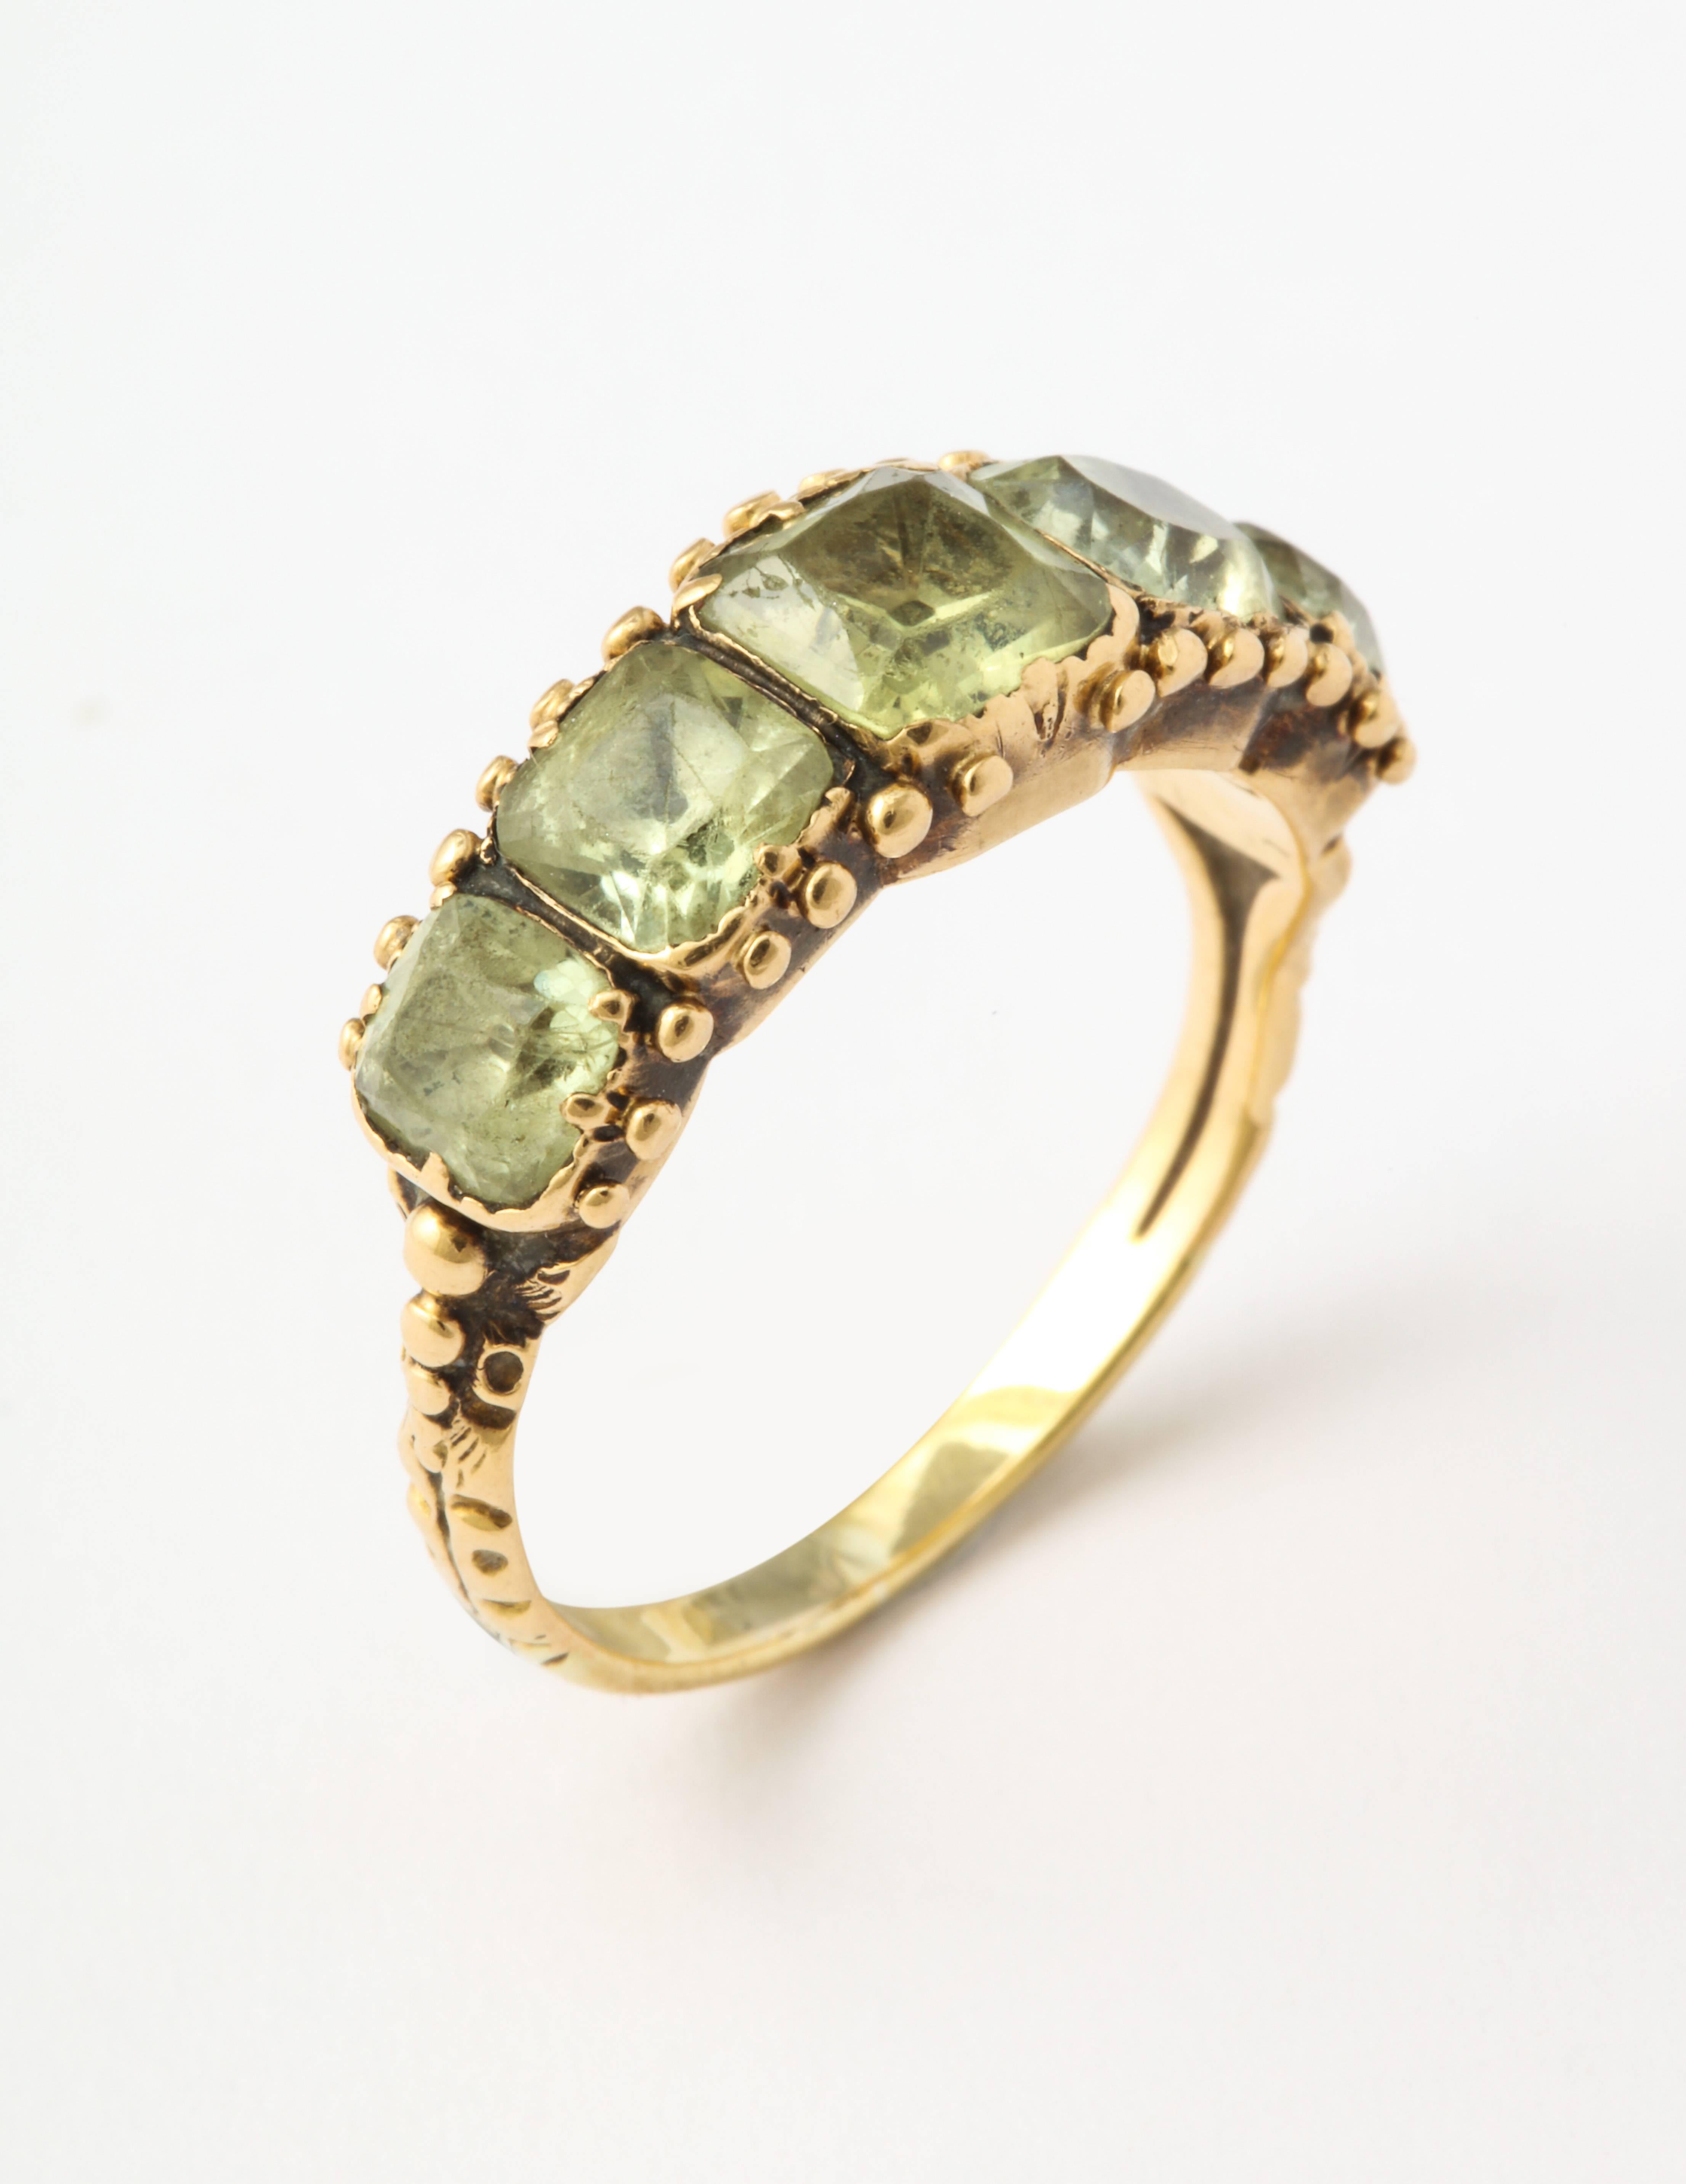 The yellow green akin to the green eyes of a pet cat or a mountain lion, is the color of the five european square cut stones of this Georgian half hoop band. The stones, of generous size, are in beaded settings of 15 kt gold. The rings shoulders